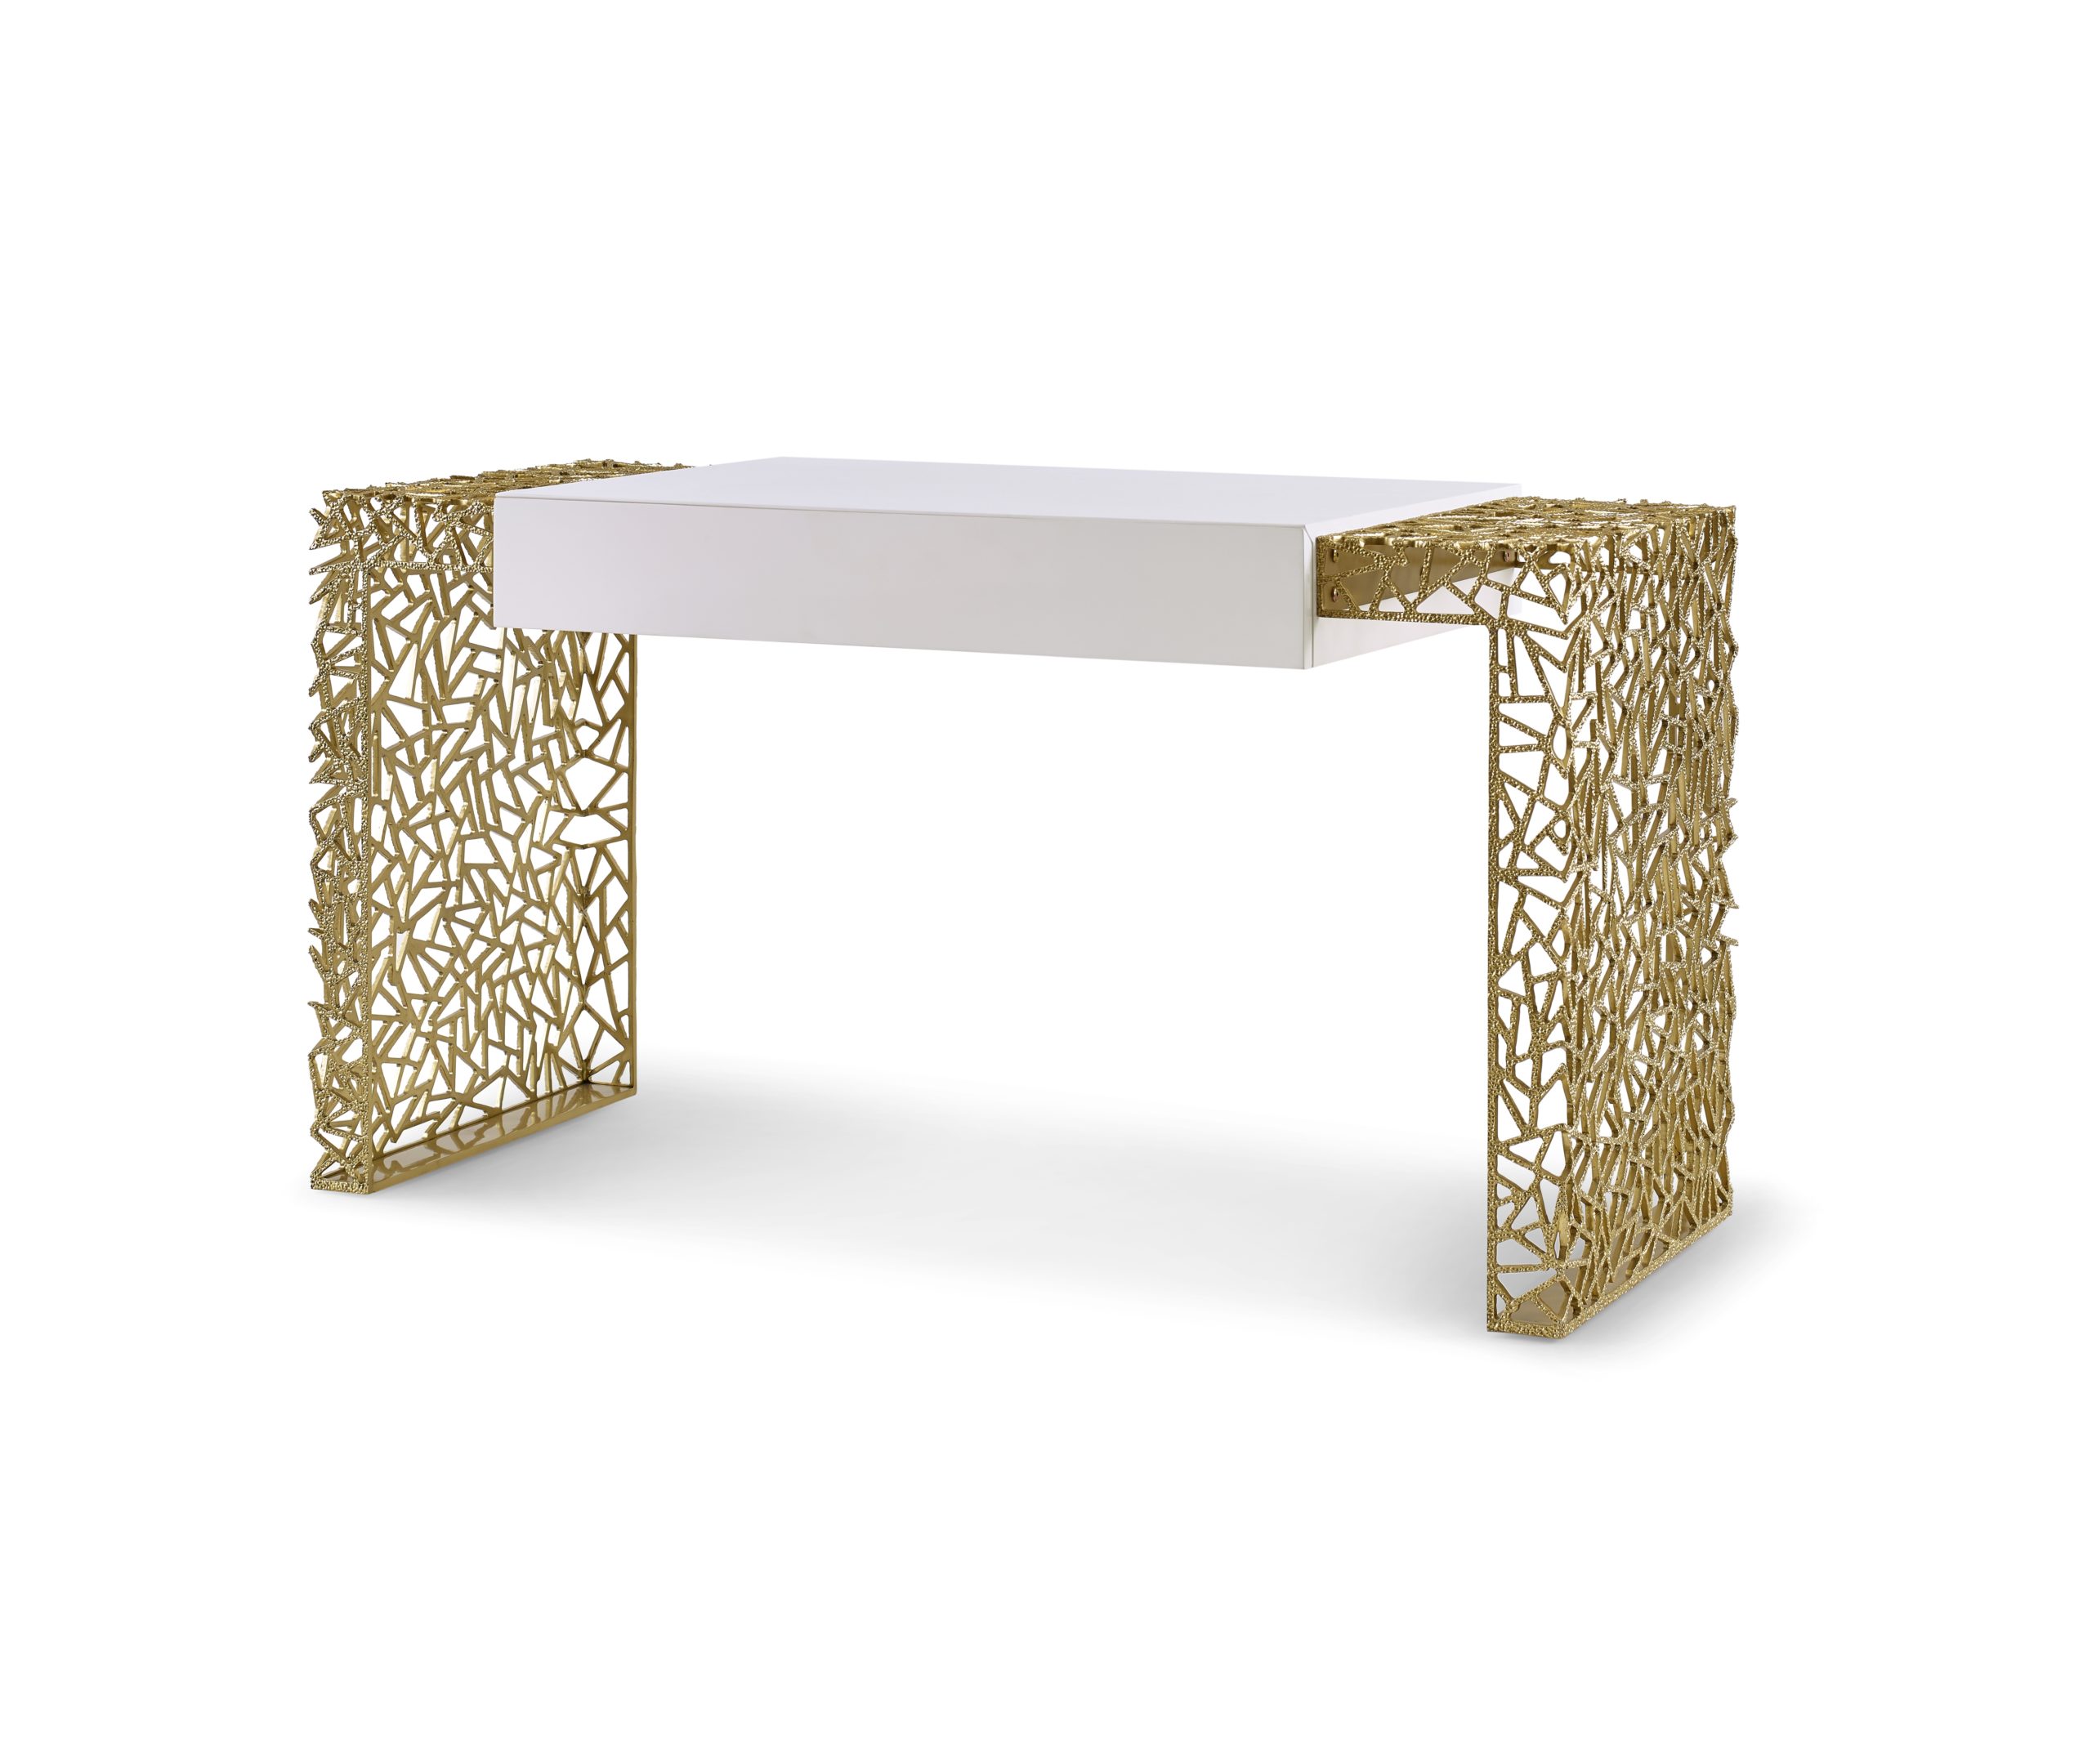 Baker_products_WNWN_fractal_desk_BAA3265_FRONT_3QRT-scaled-1